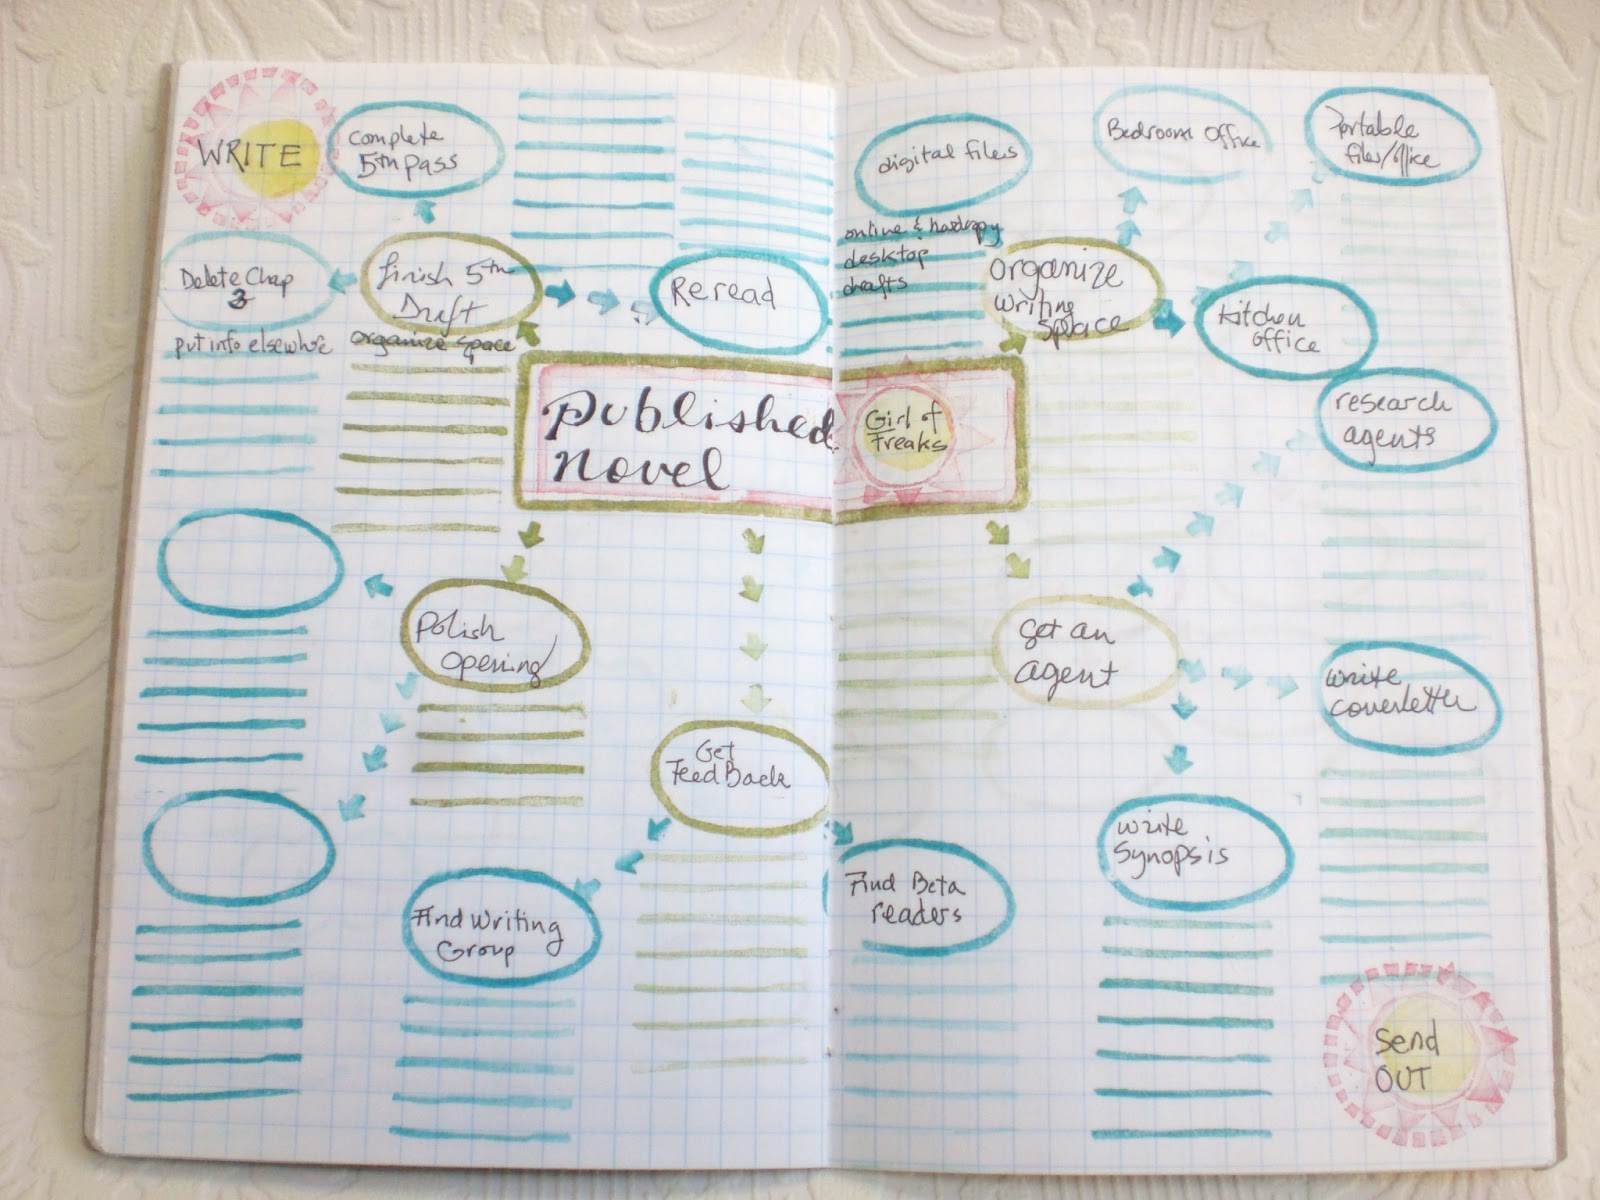 Warrior Girl Rowena Murillo Creating A Mind Map To Plan Your Goals